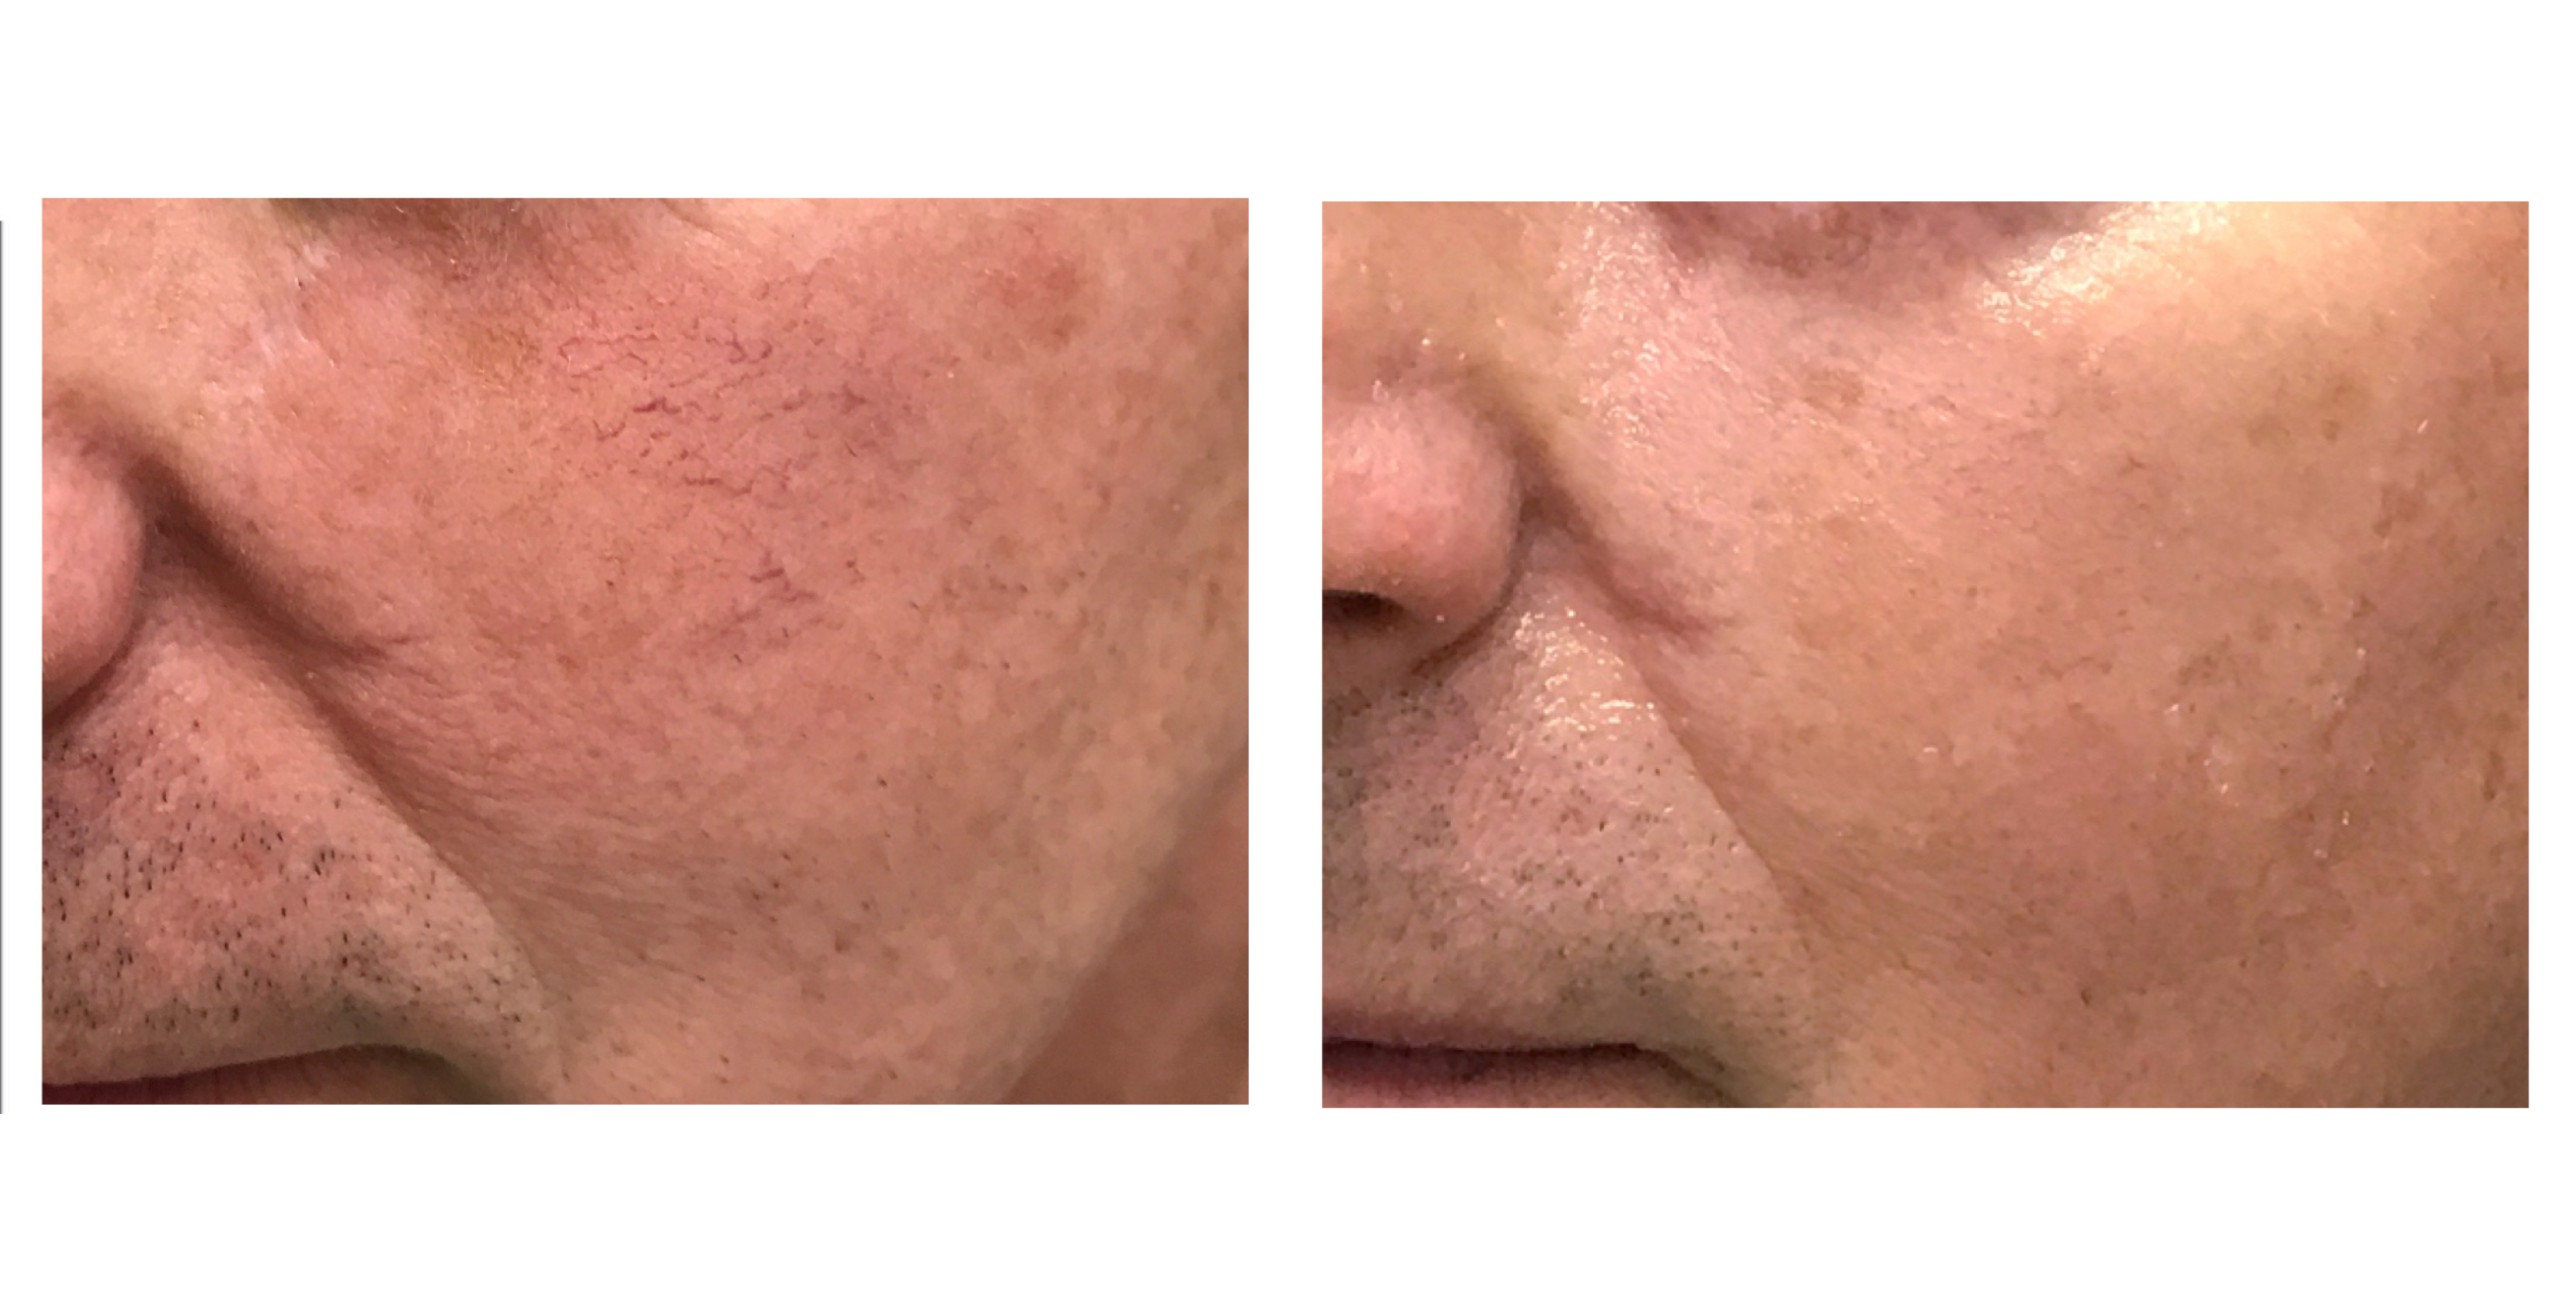 Before and After: Redness and Vessels